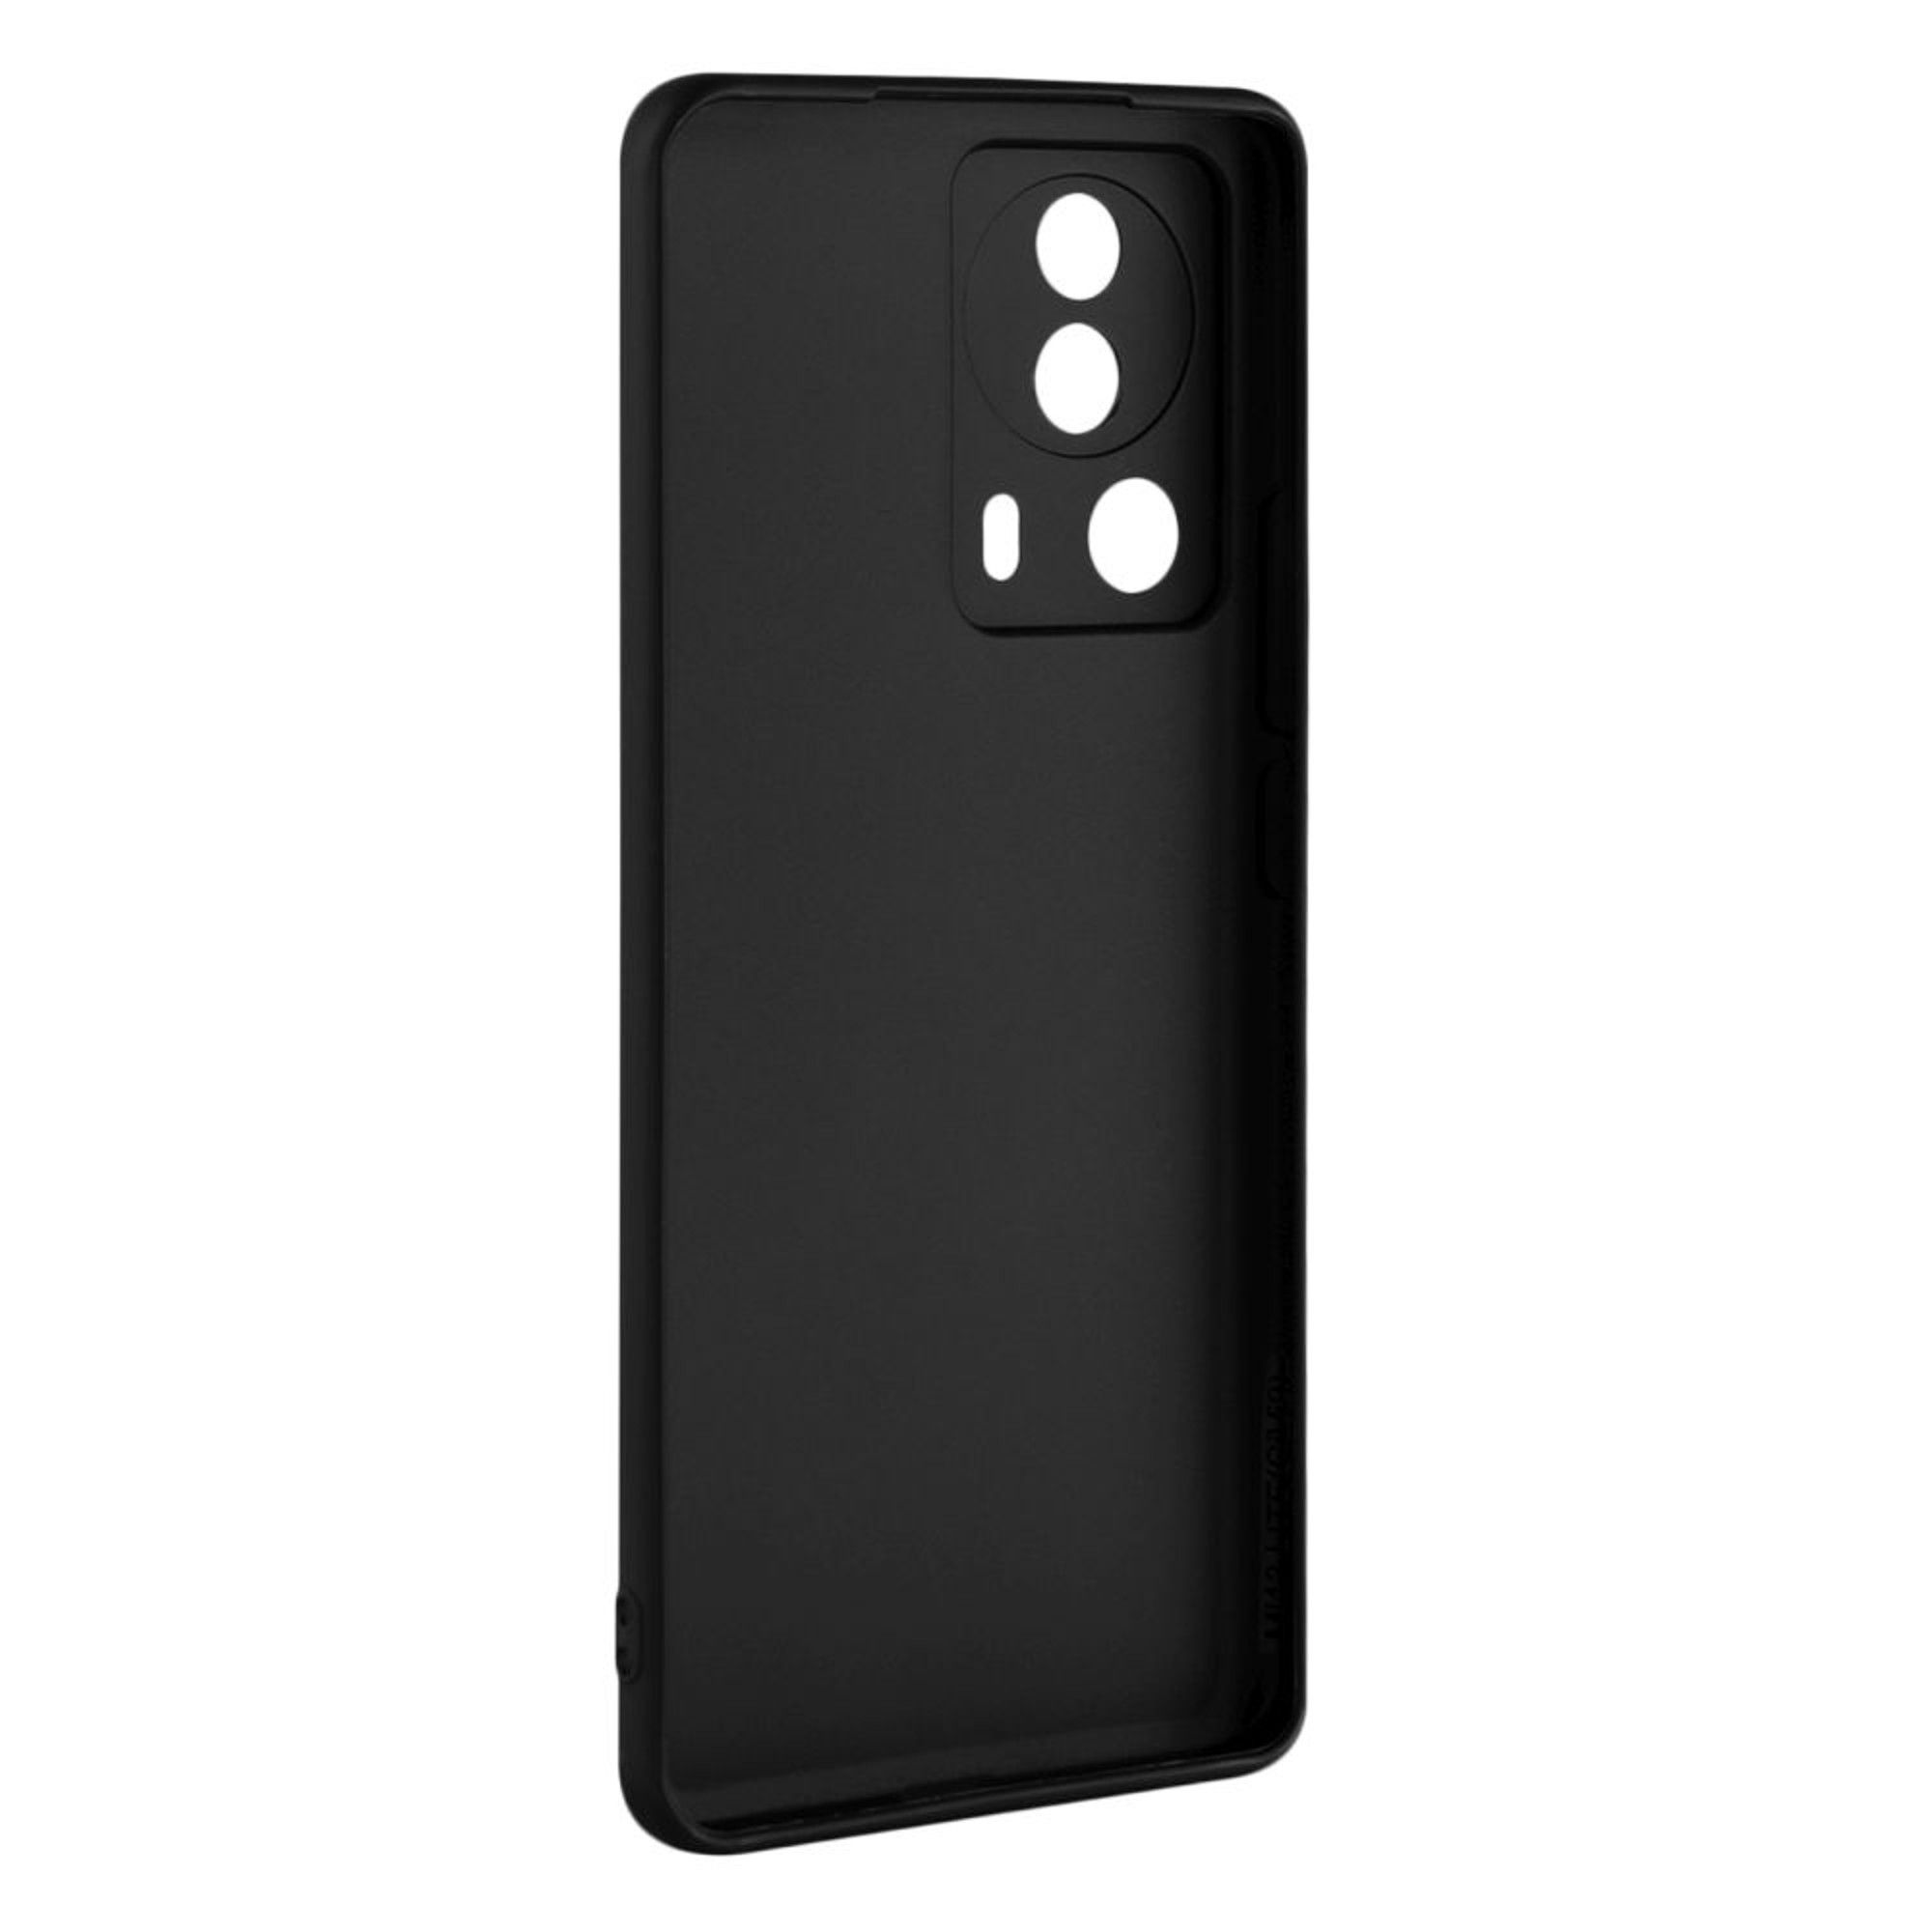 13 Lite, Schwarz FIXED Xiaomi, Backcover, FIXST-1097-BK, Soft-Touch Story